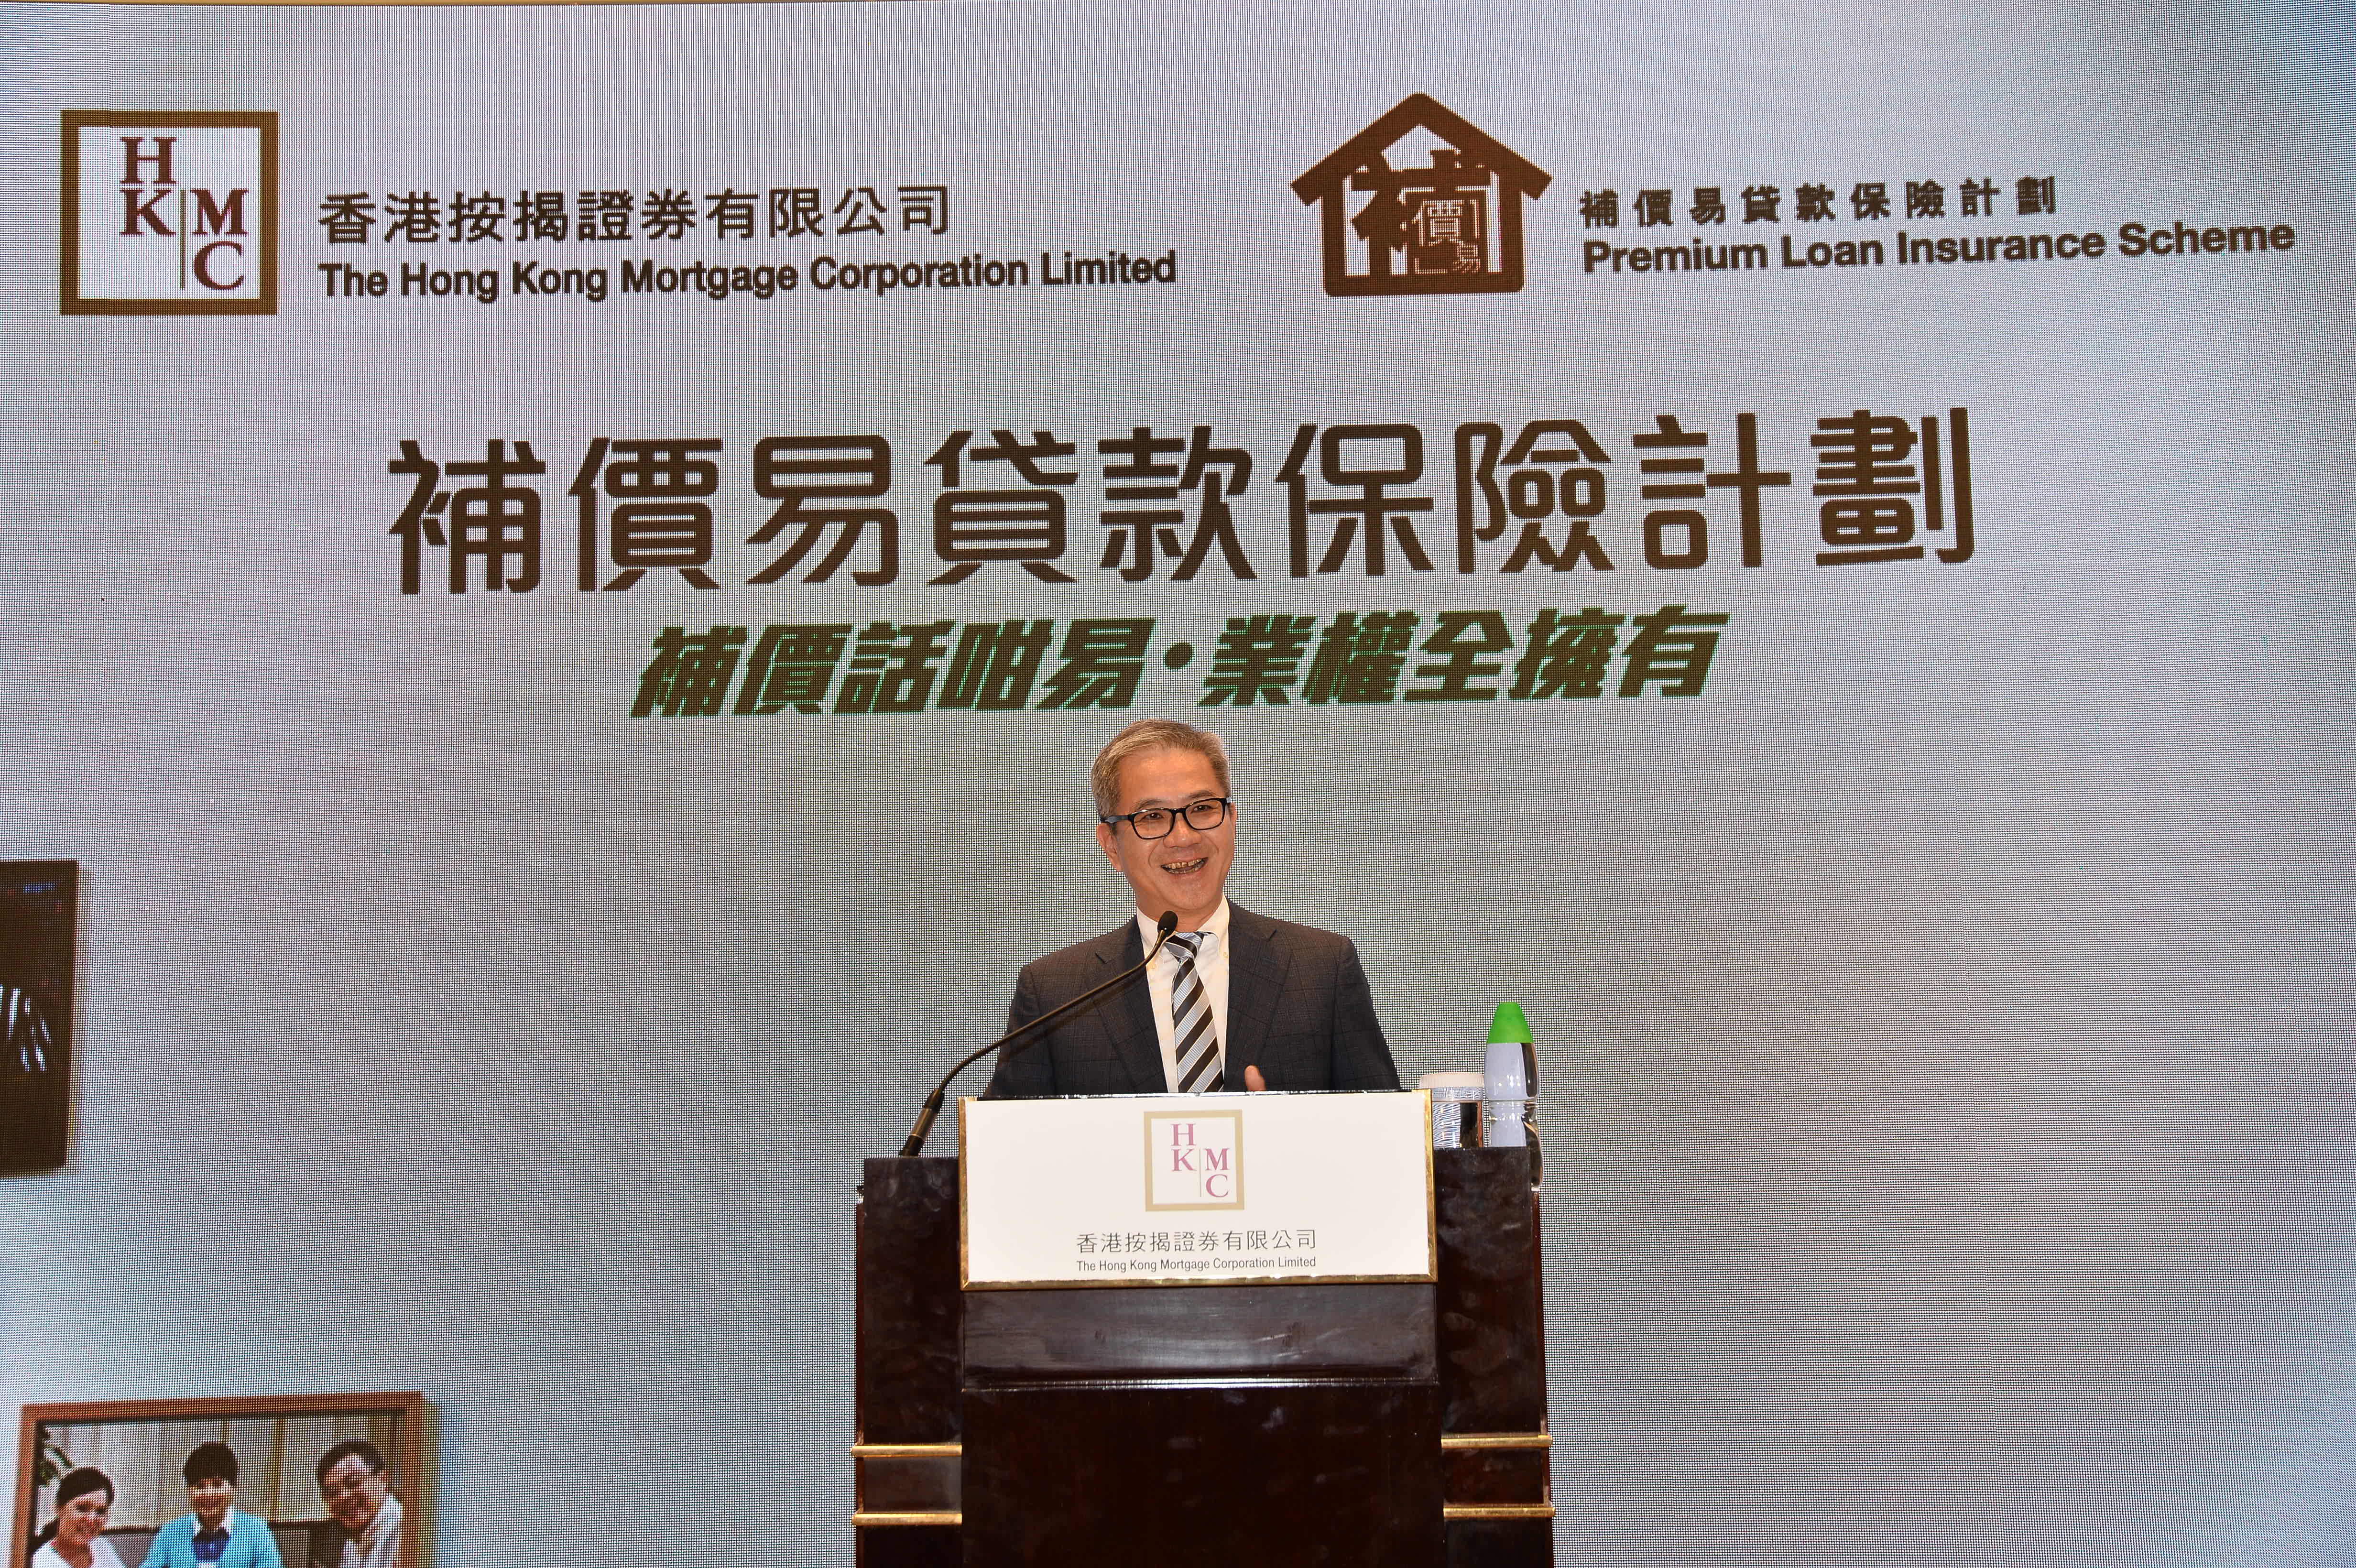 The Chief Executive Officer of the HKMC, Mr Raymond Li, believes the PLIS can help release some under-utilised flats and promote the market circulation of subsidised housing properties.